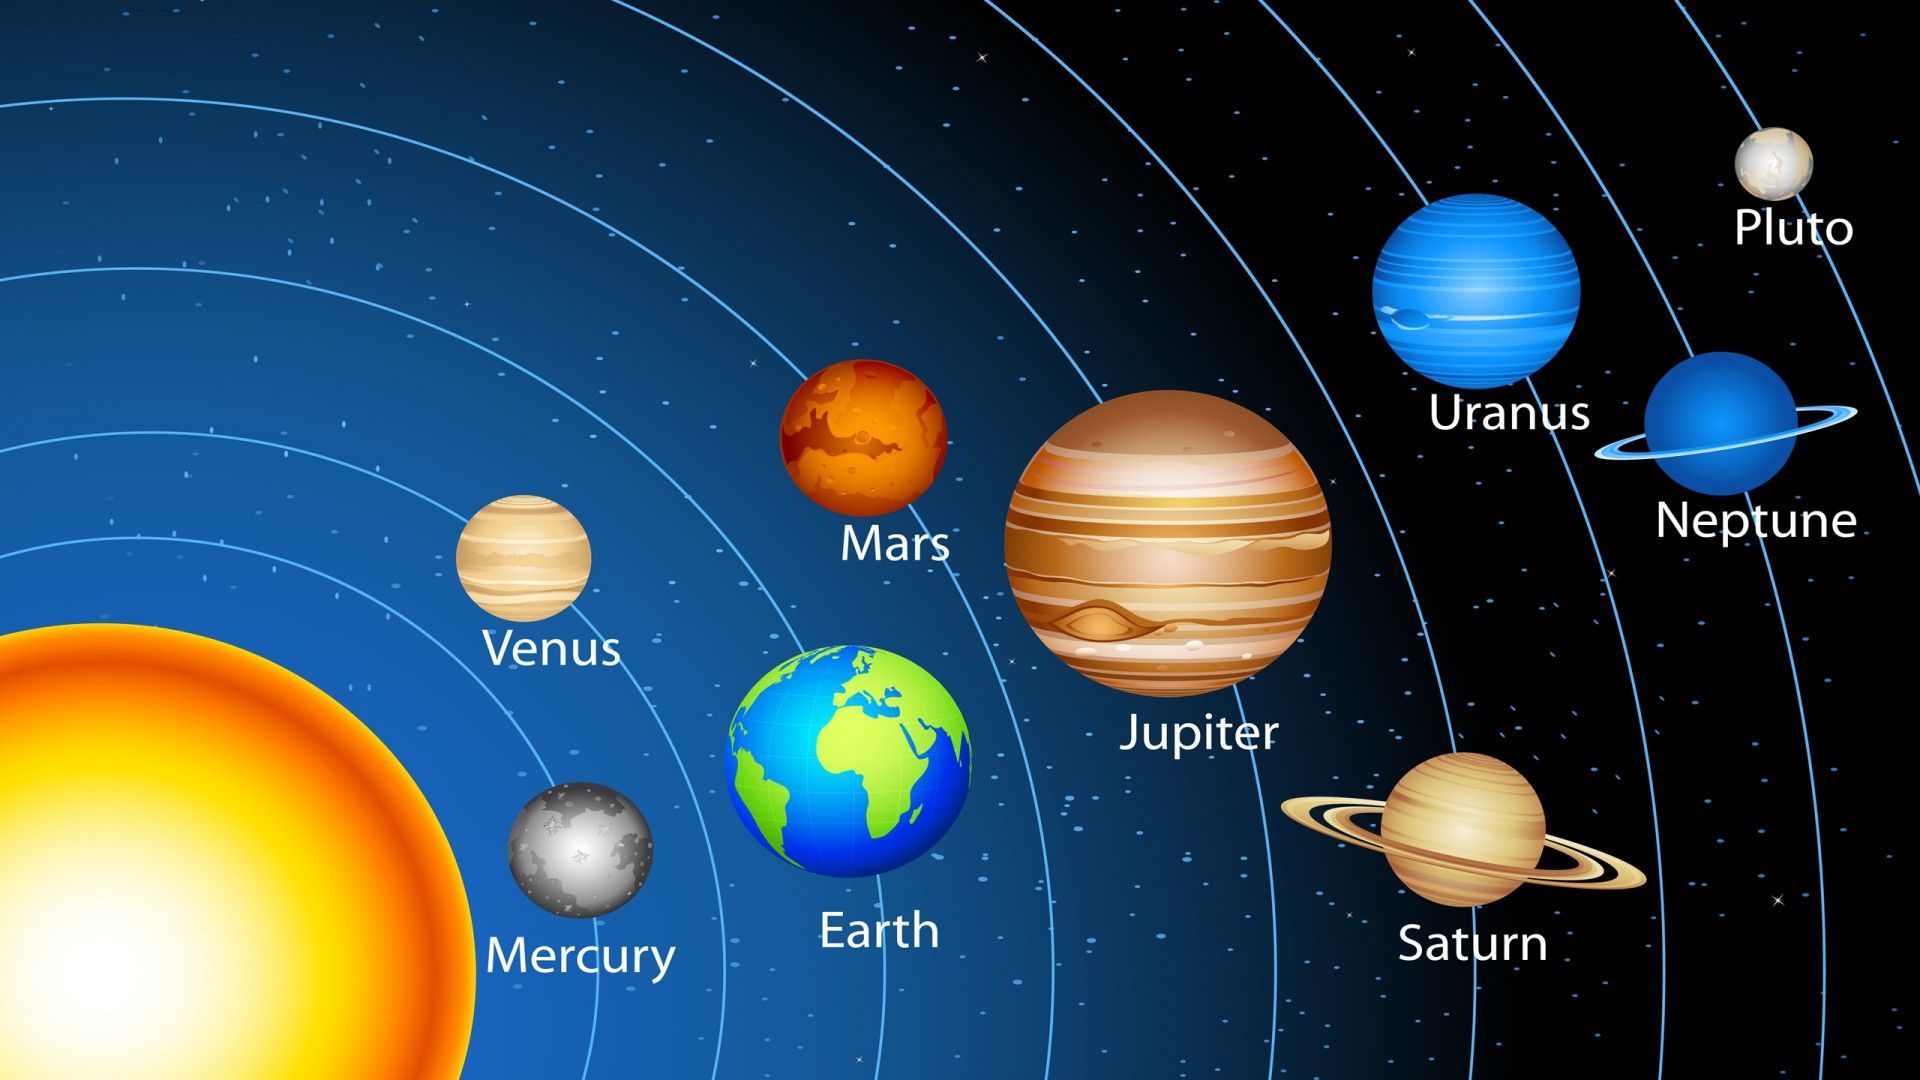 Planets And Solar System Hd Wallpaper 9877 : Wallpapers13.com